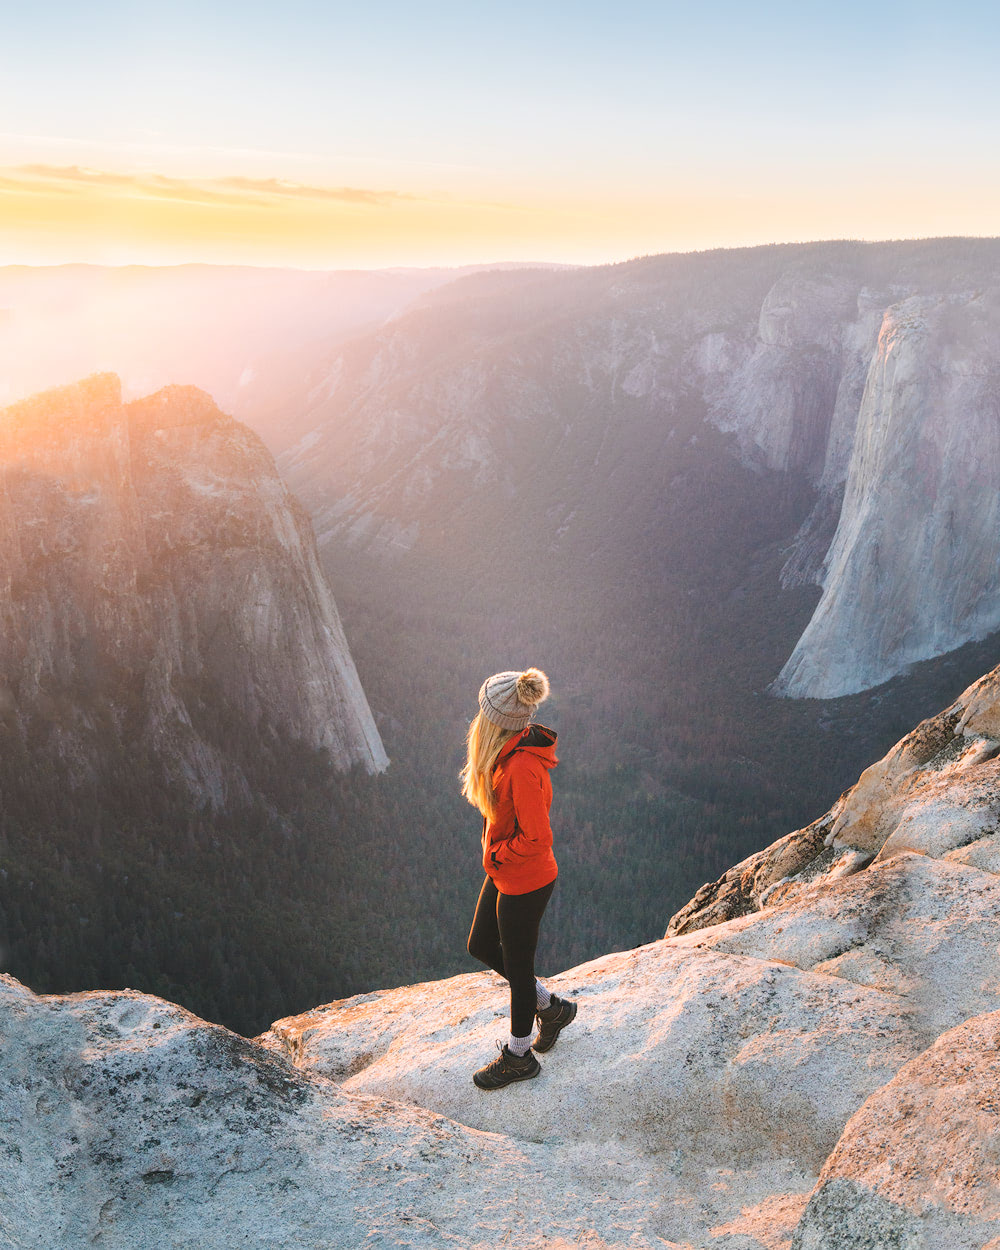 The Ultimate Guide to Exploring Yosemite National Park - Taft Point